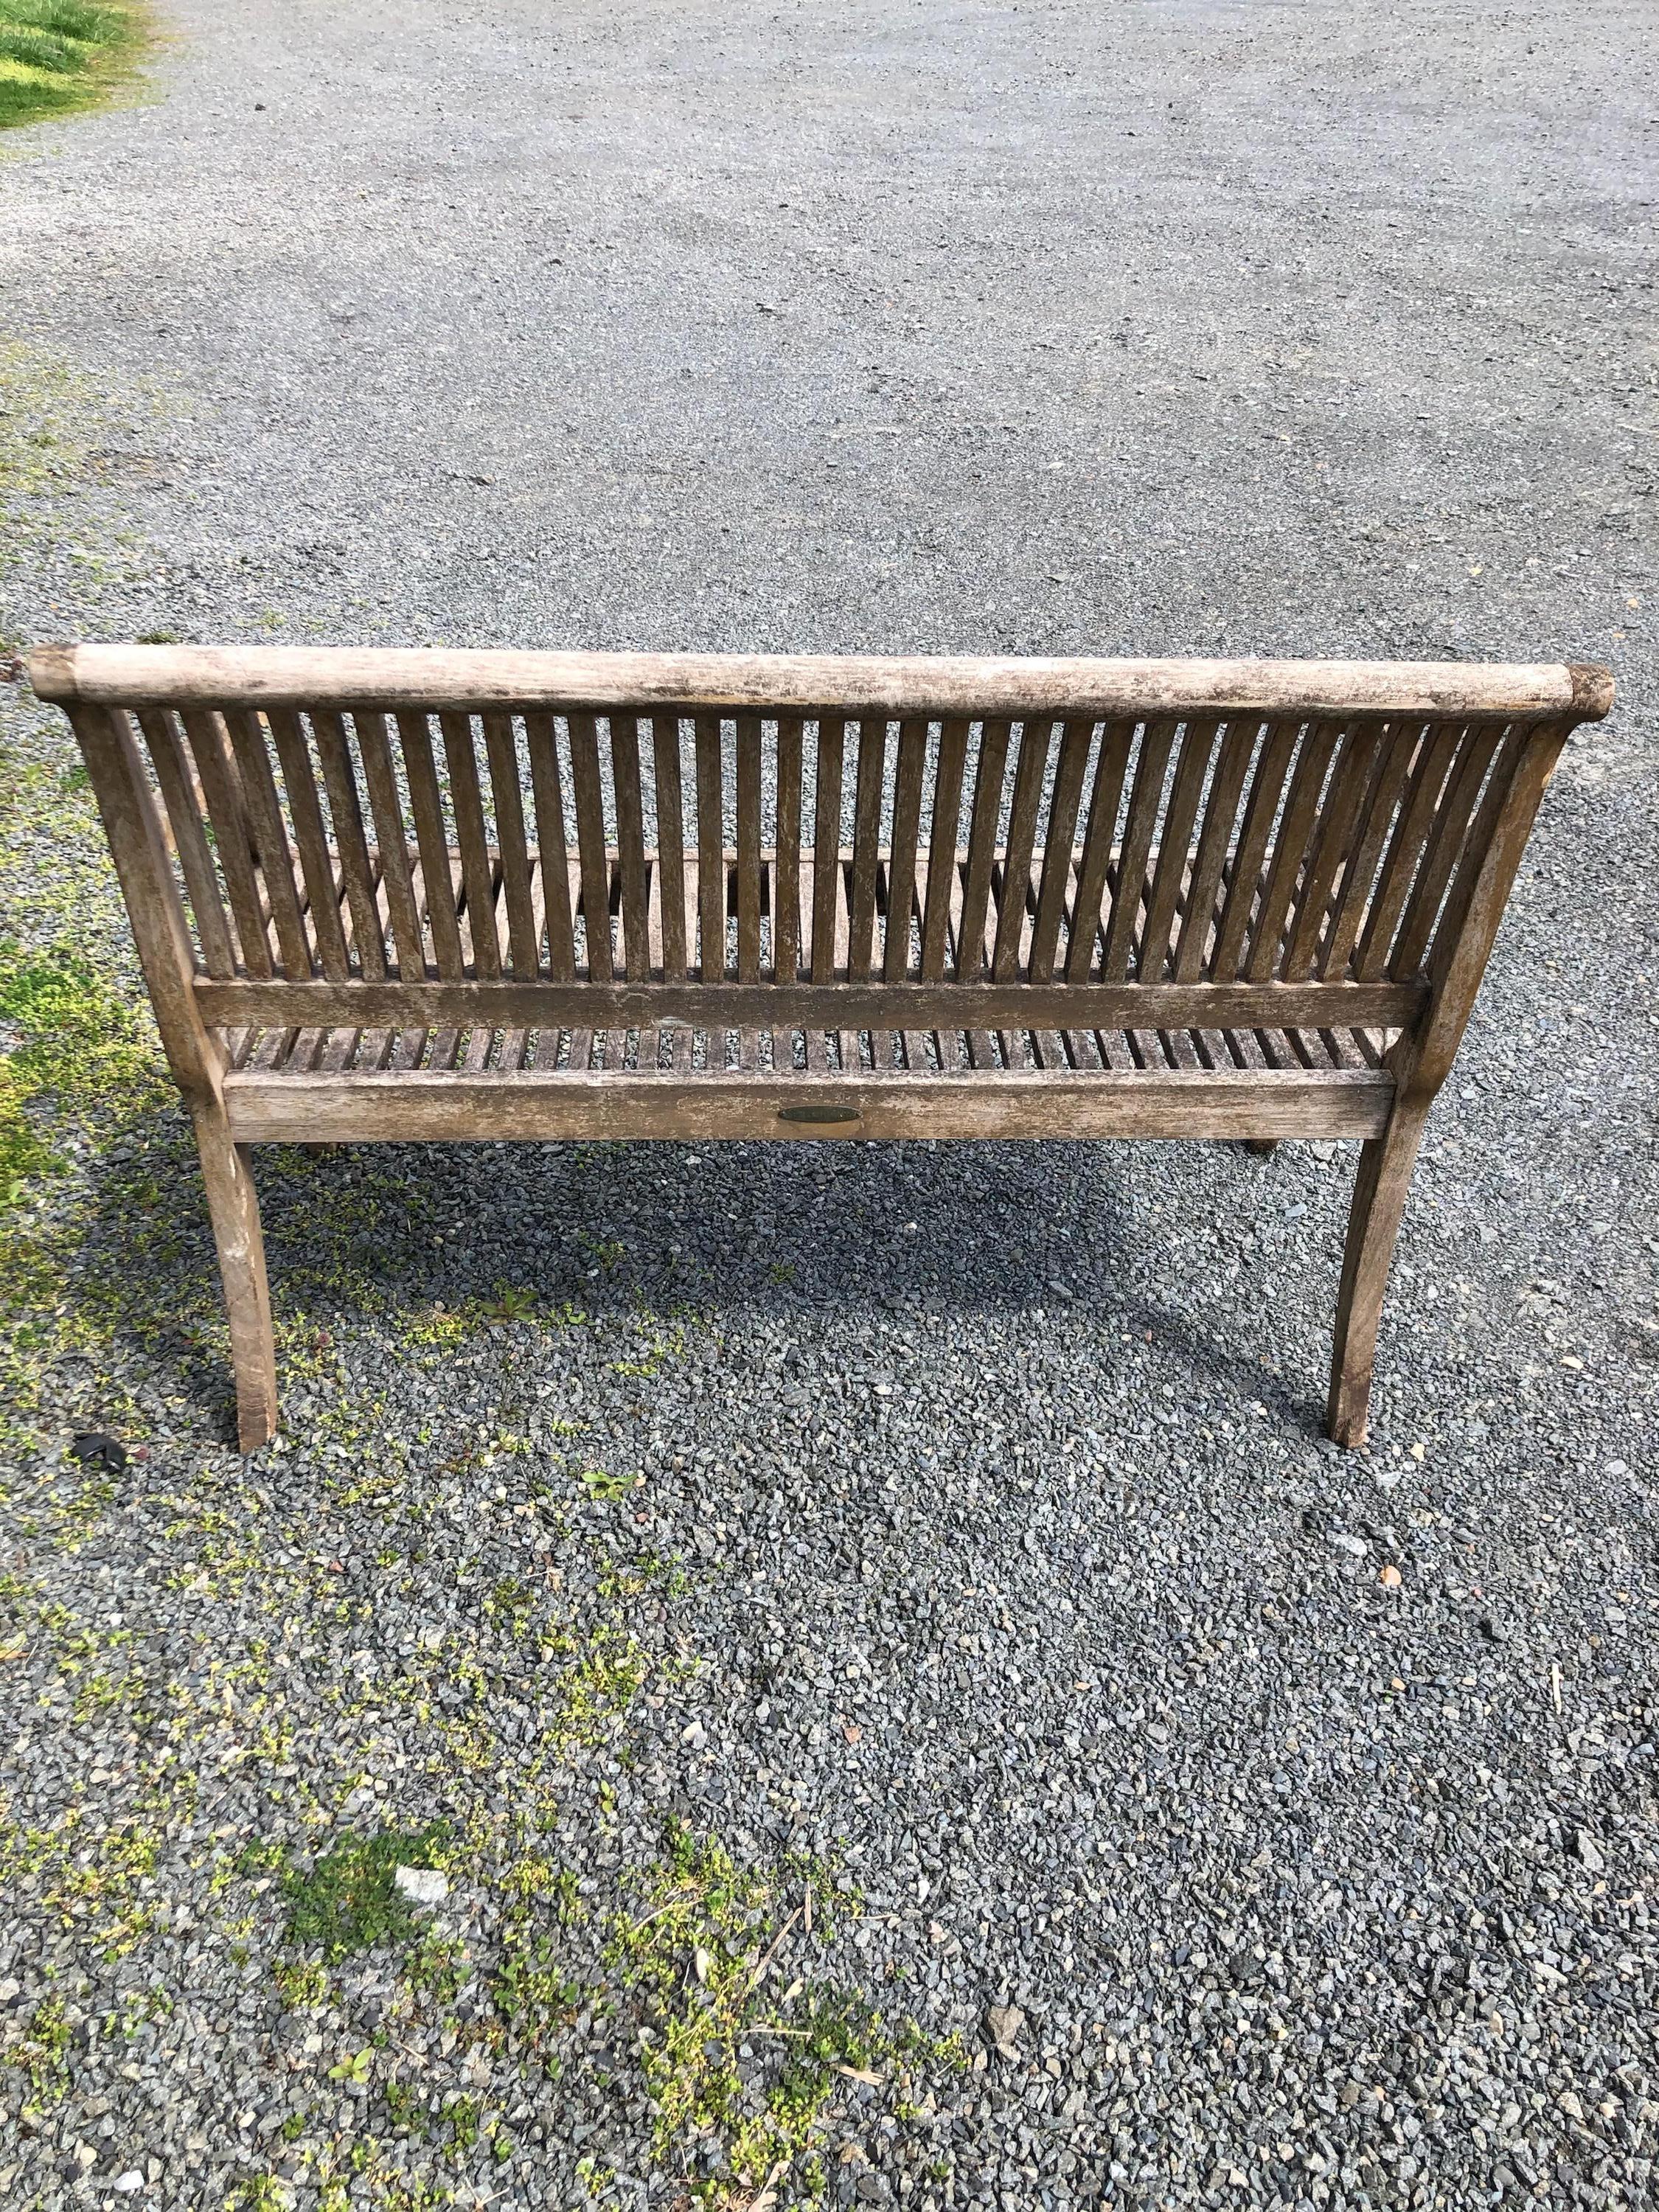 Vintage Teak Garden Bench By Smith And Hawken At 1stdibs